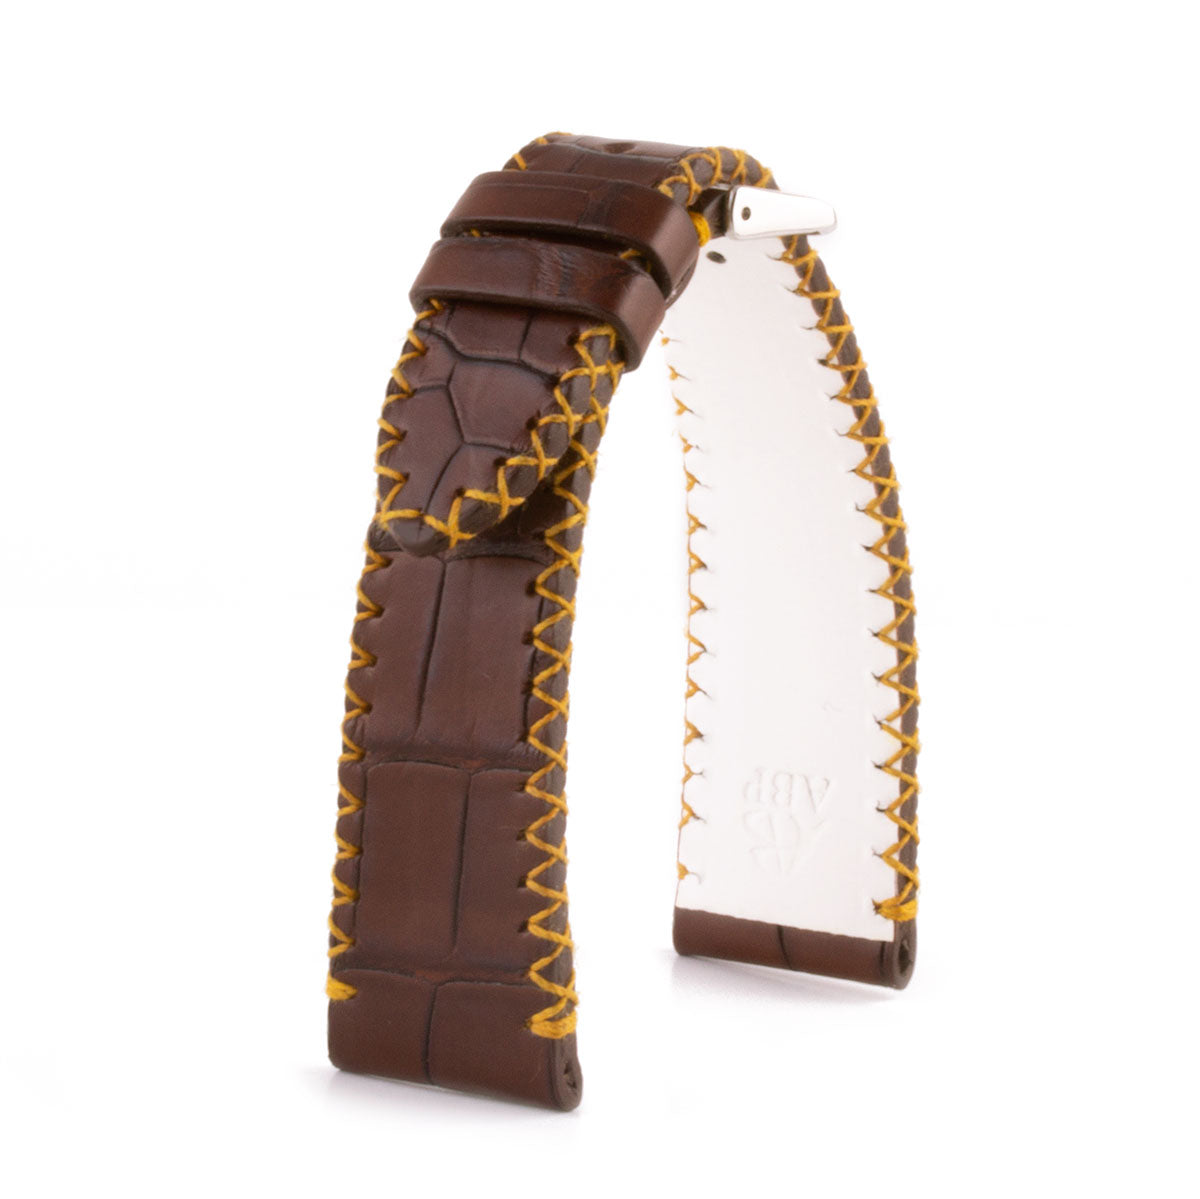 Tribute to Expo 2020 Dubai - Leather watch band - Alligator and camel (white / brown / yellow)